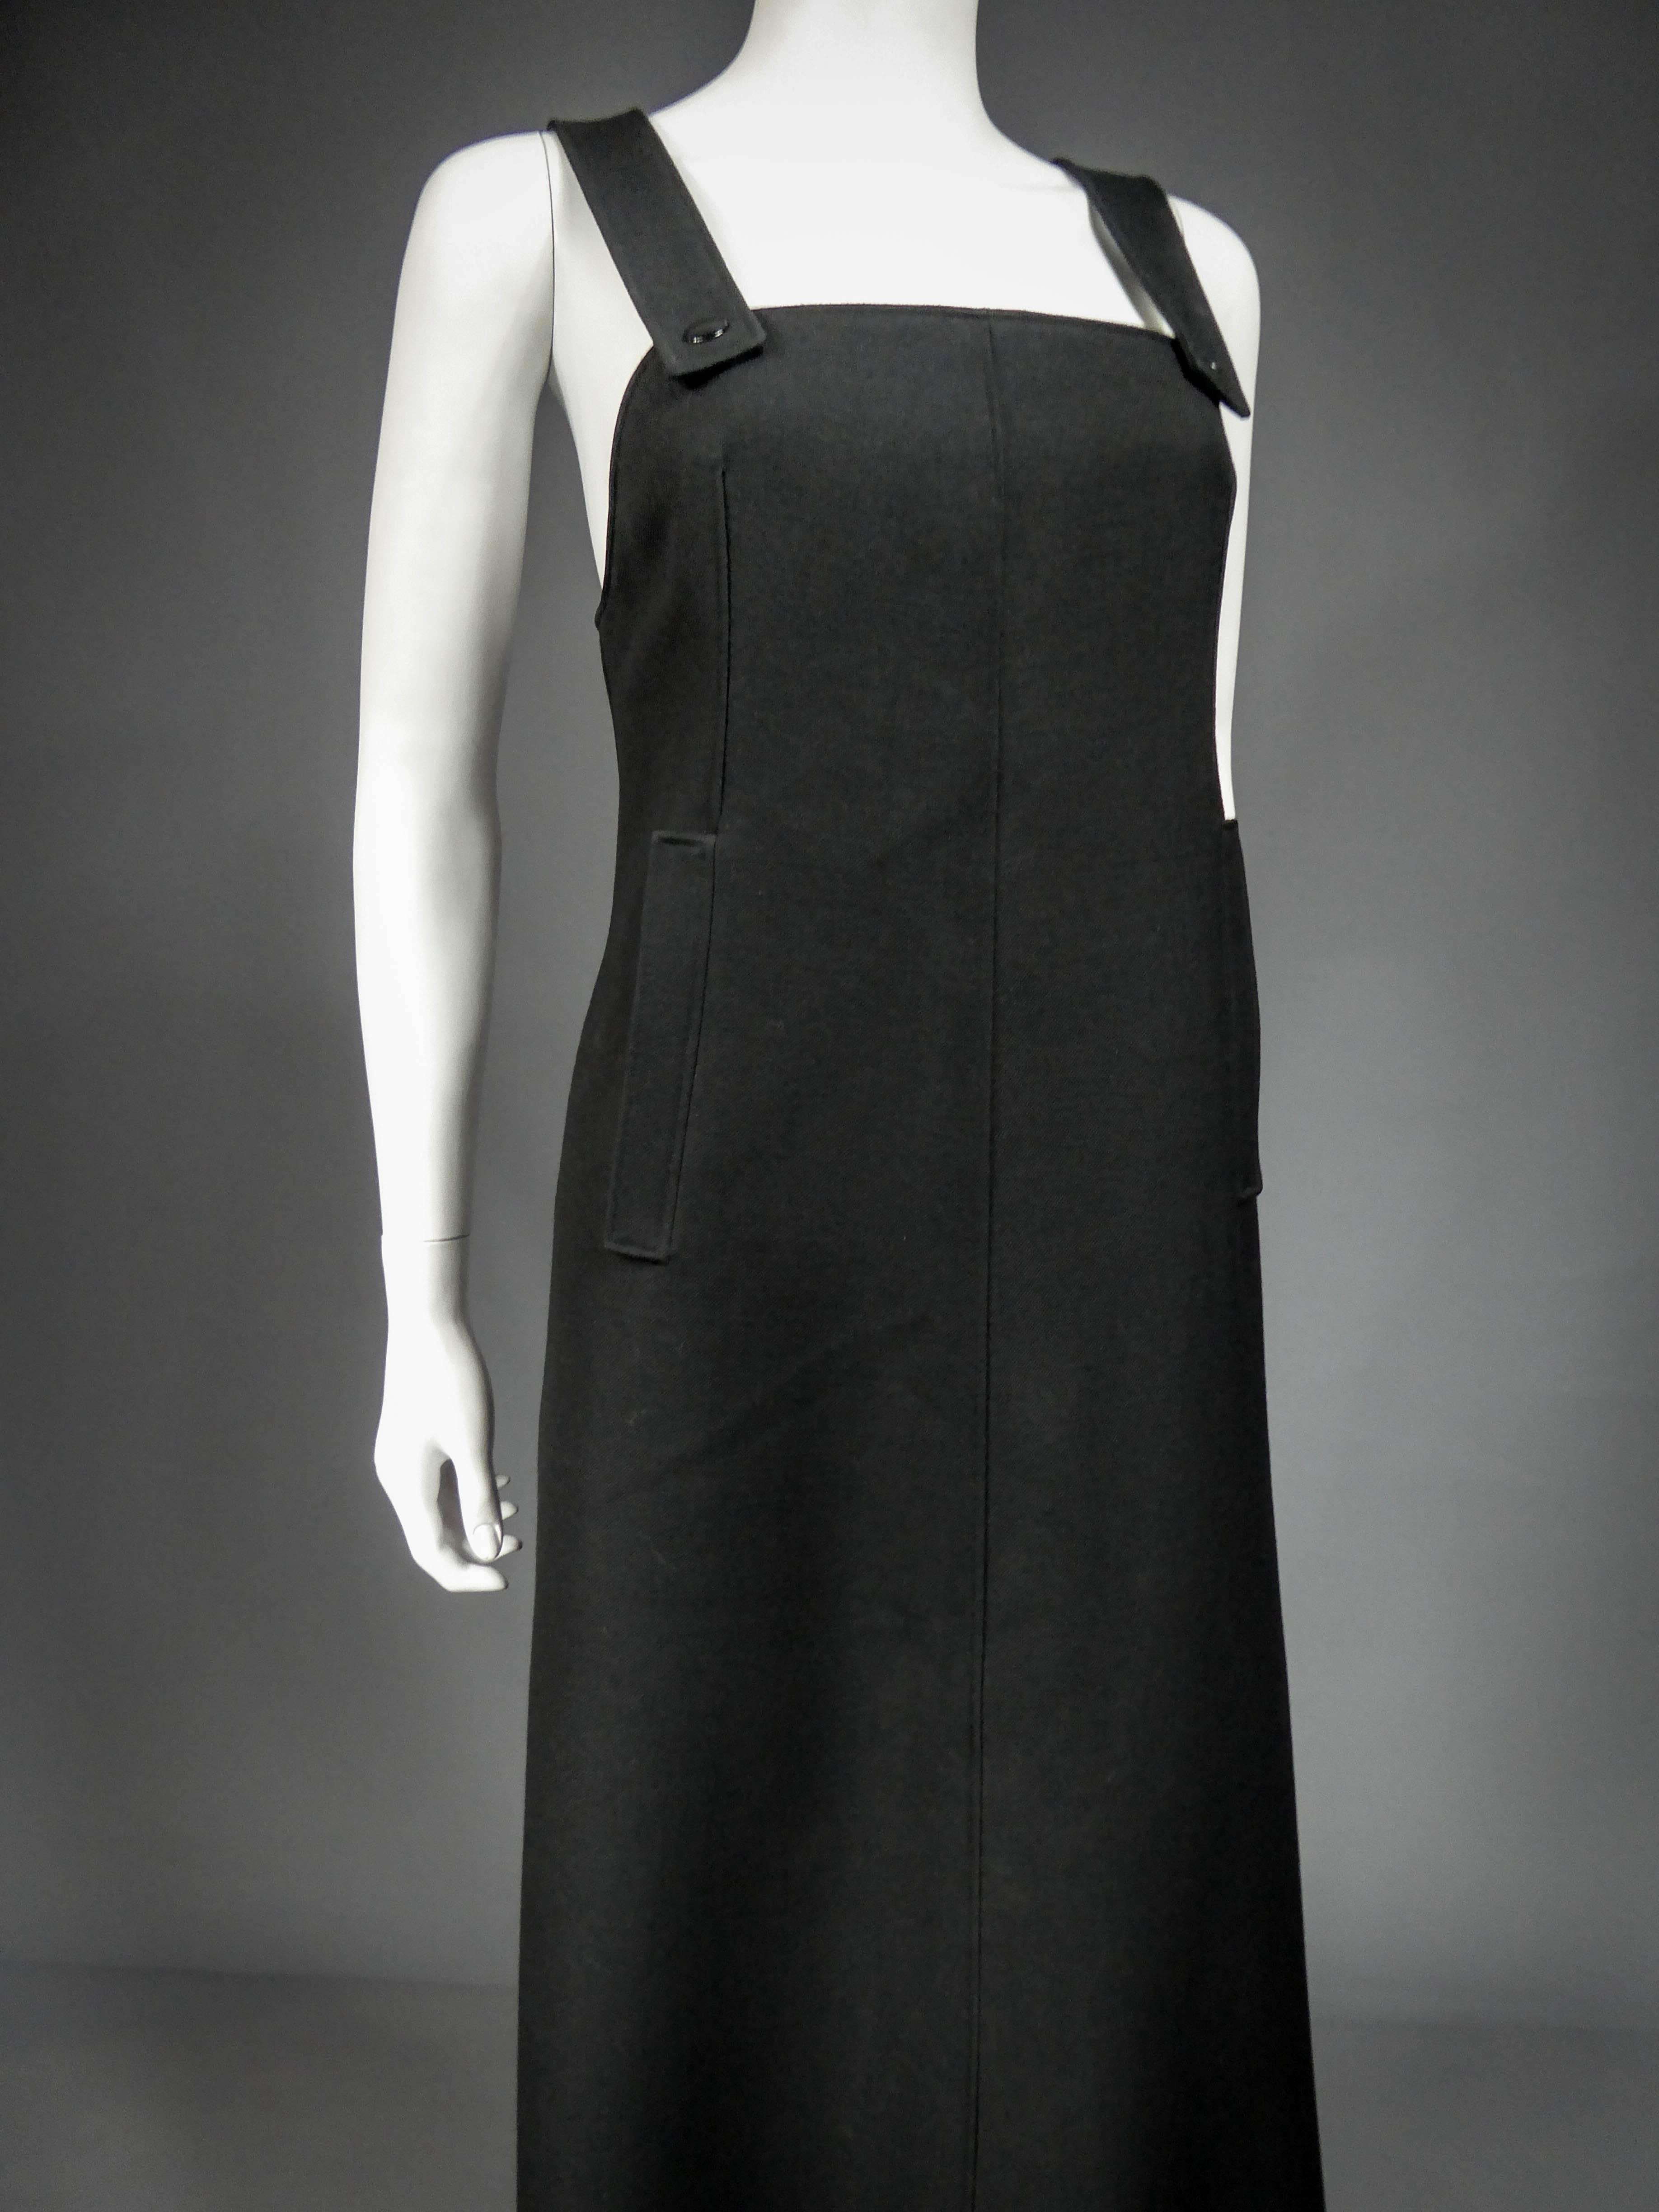 Women's An André Courrèges Chasuble French Couture Dress Numbered 0031643 Circa 1970 For Sale